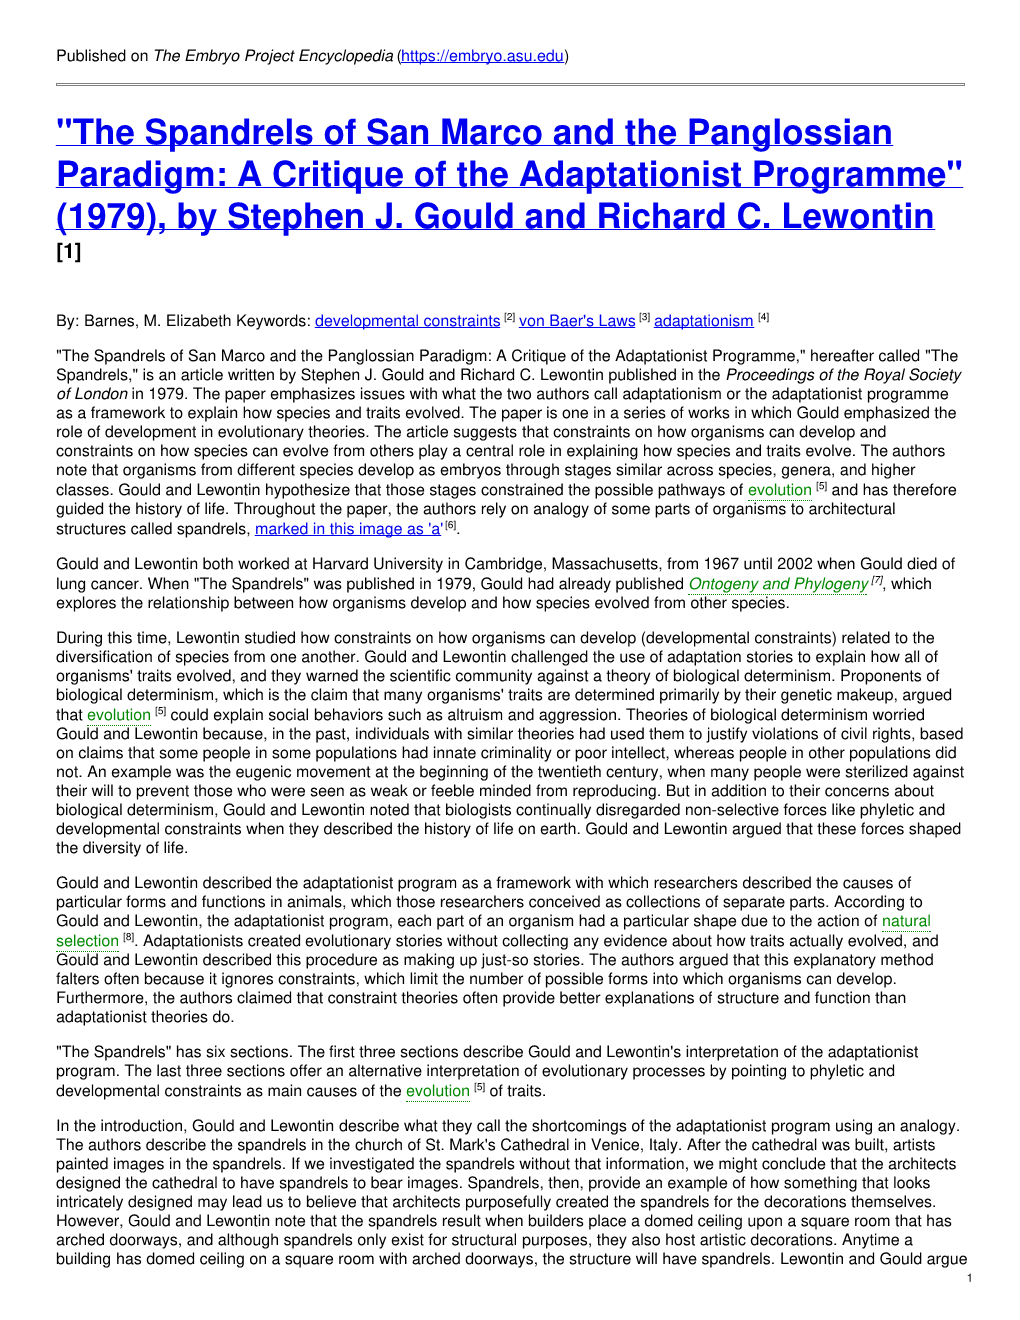 "The Spandrels of San Marco and the Panglossian Paradigm: a Critique of the Adaptationist Programme" (1979), by Stephen J